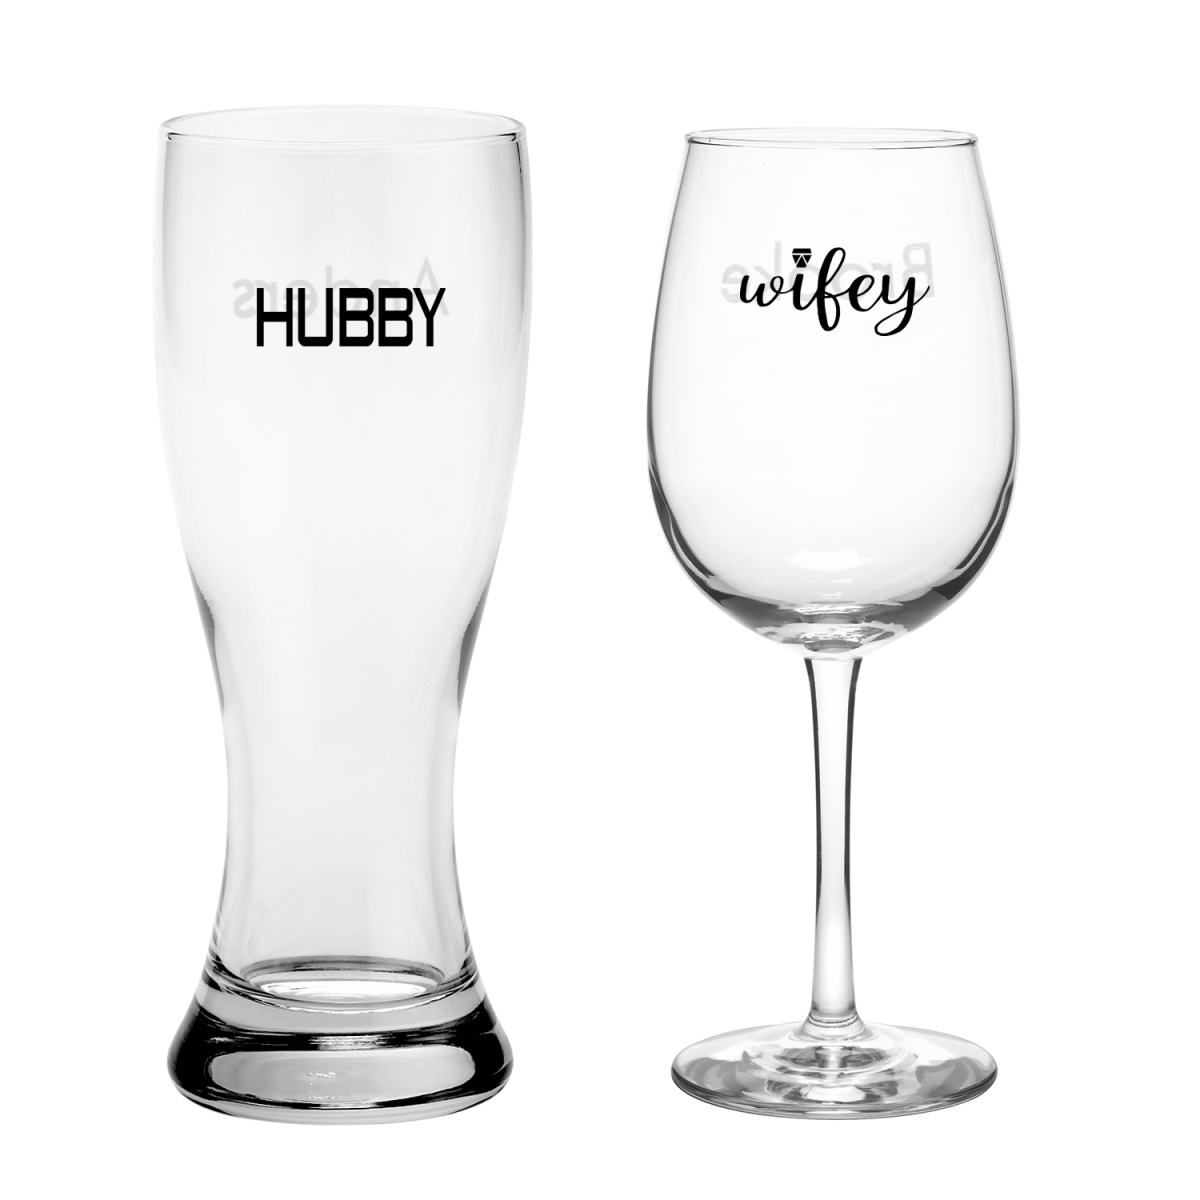 Picture of Hortense B. Hewitt 21576P Wifey Hubby Glass Set - Personalized - Pack of 2